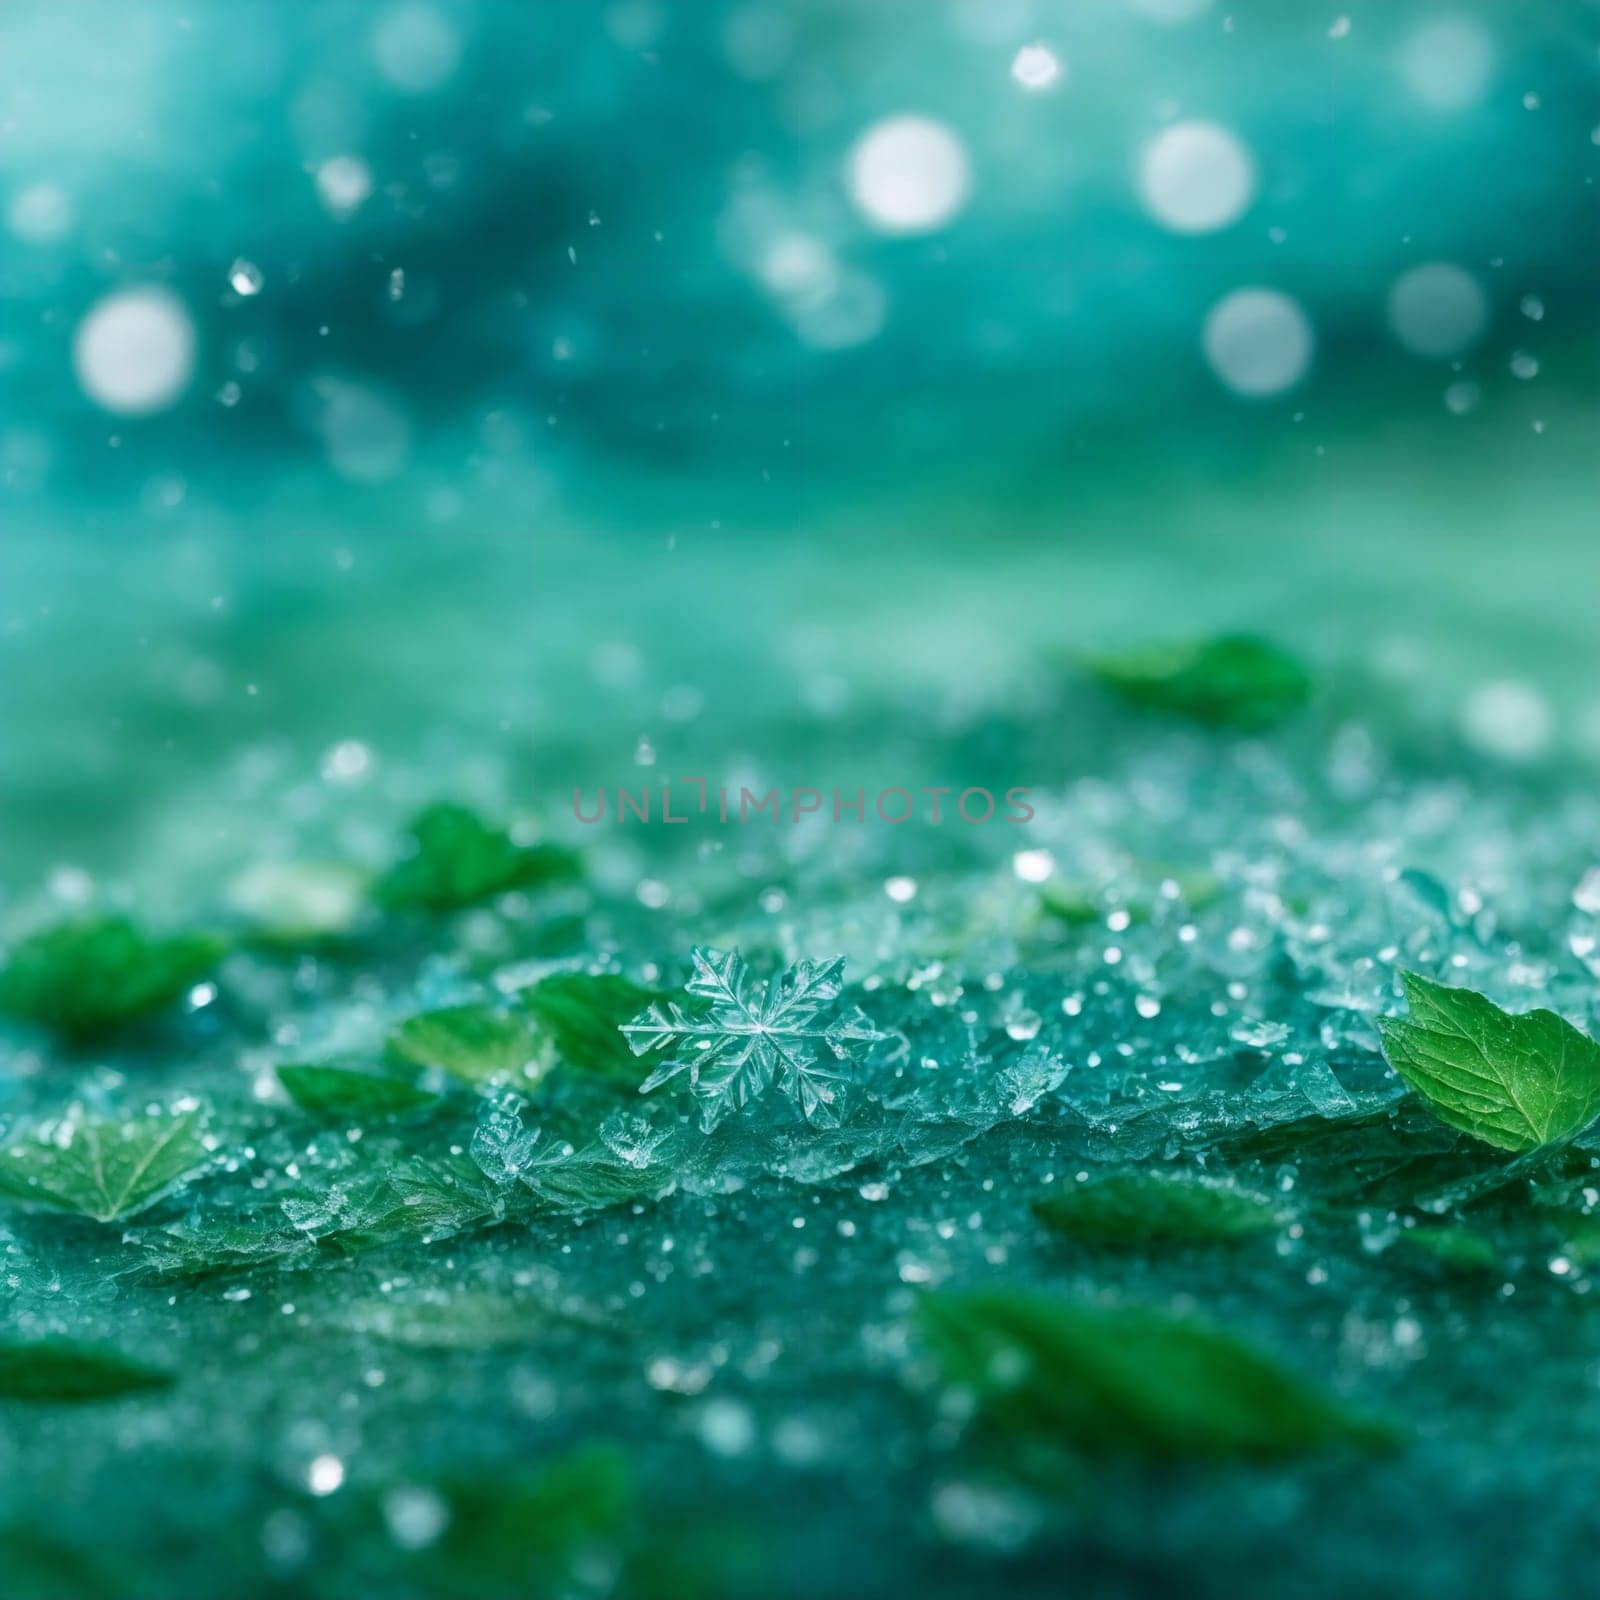 blue green bright abstract background with water drops by Севостьянов